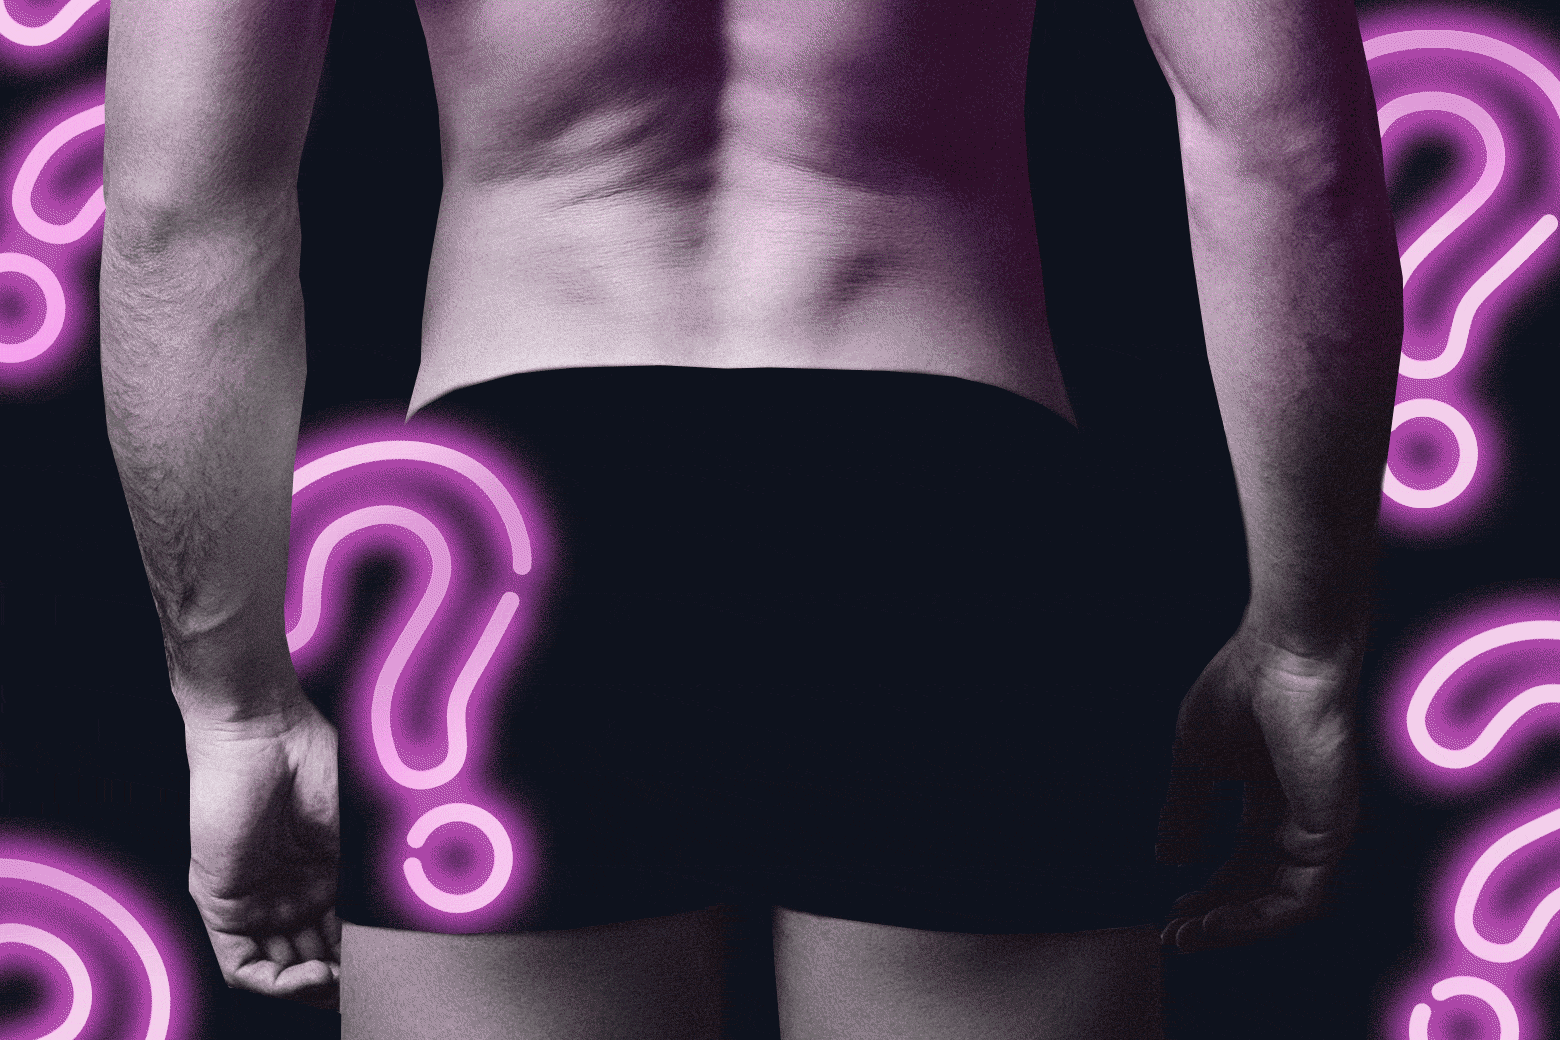 A man in boxer briefs facing away from the camera. Neon question marks surround him.